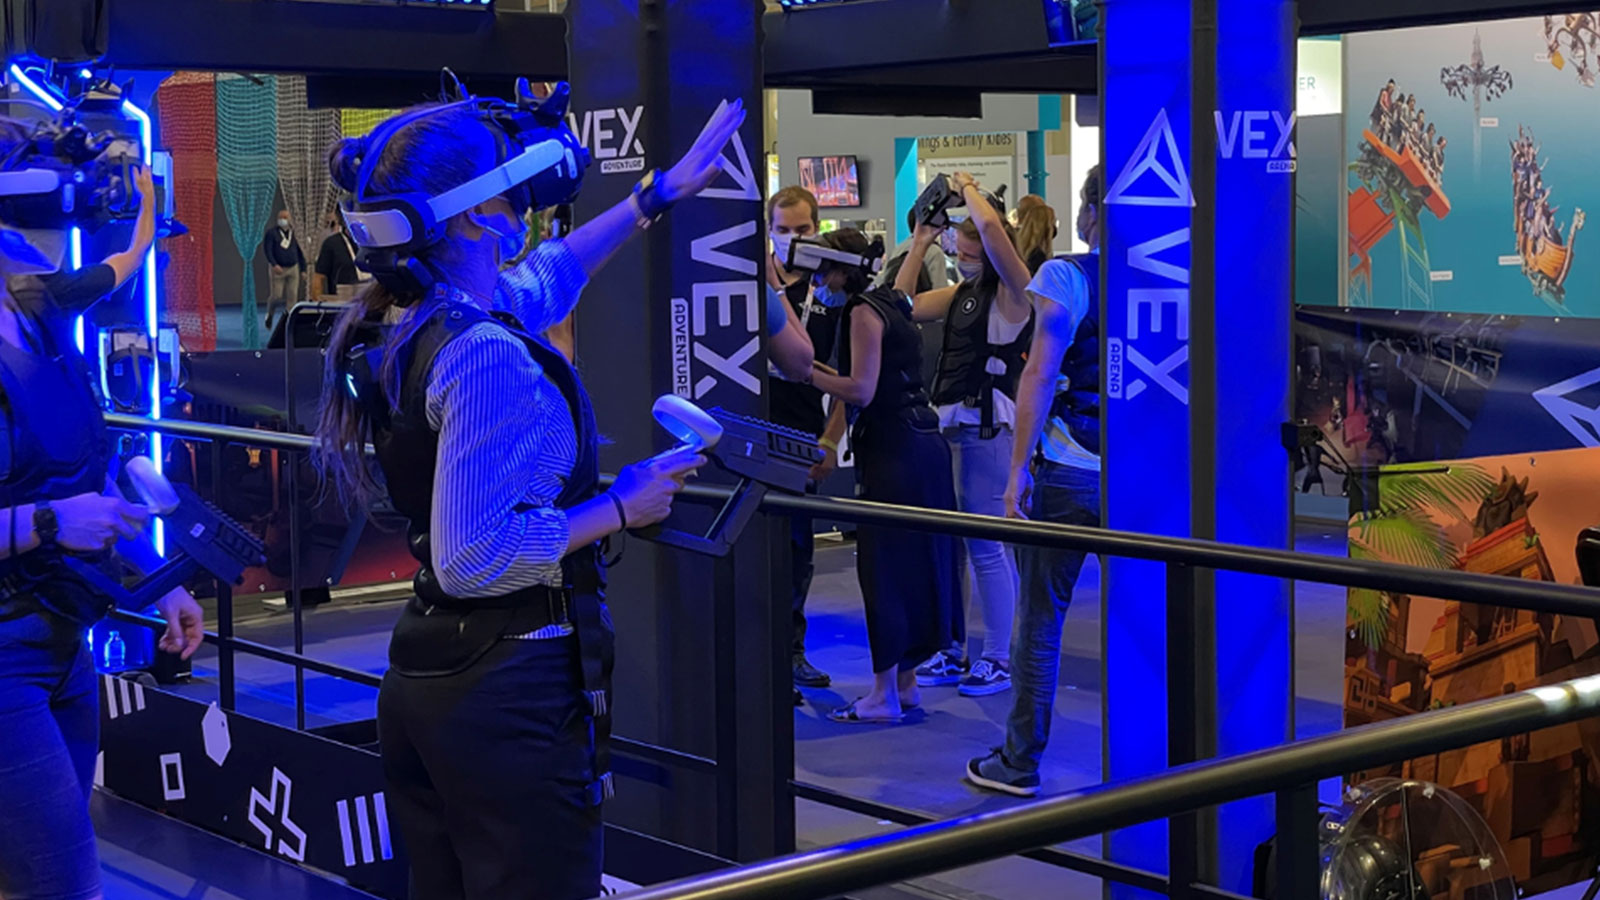 Users at a VEX vr arcade wearing headset with Ultraleap hand tracking